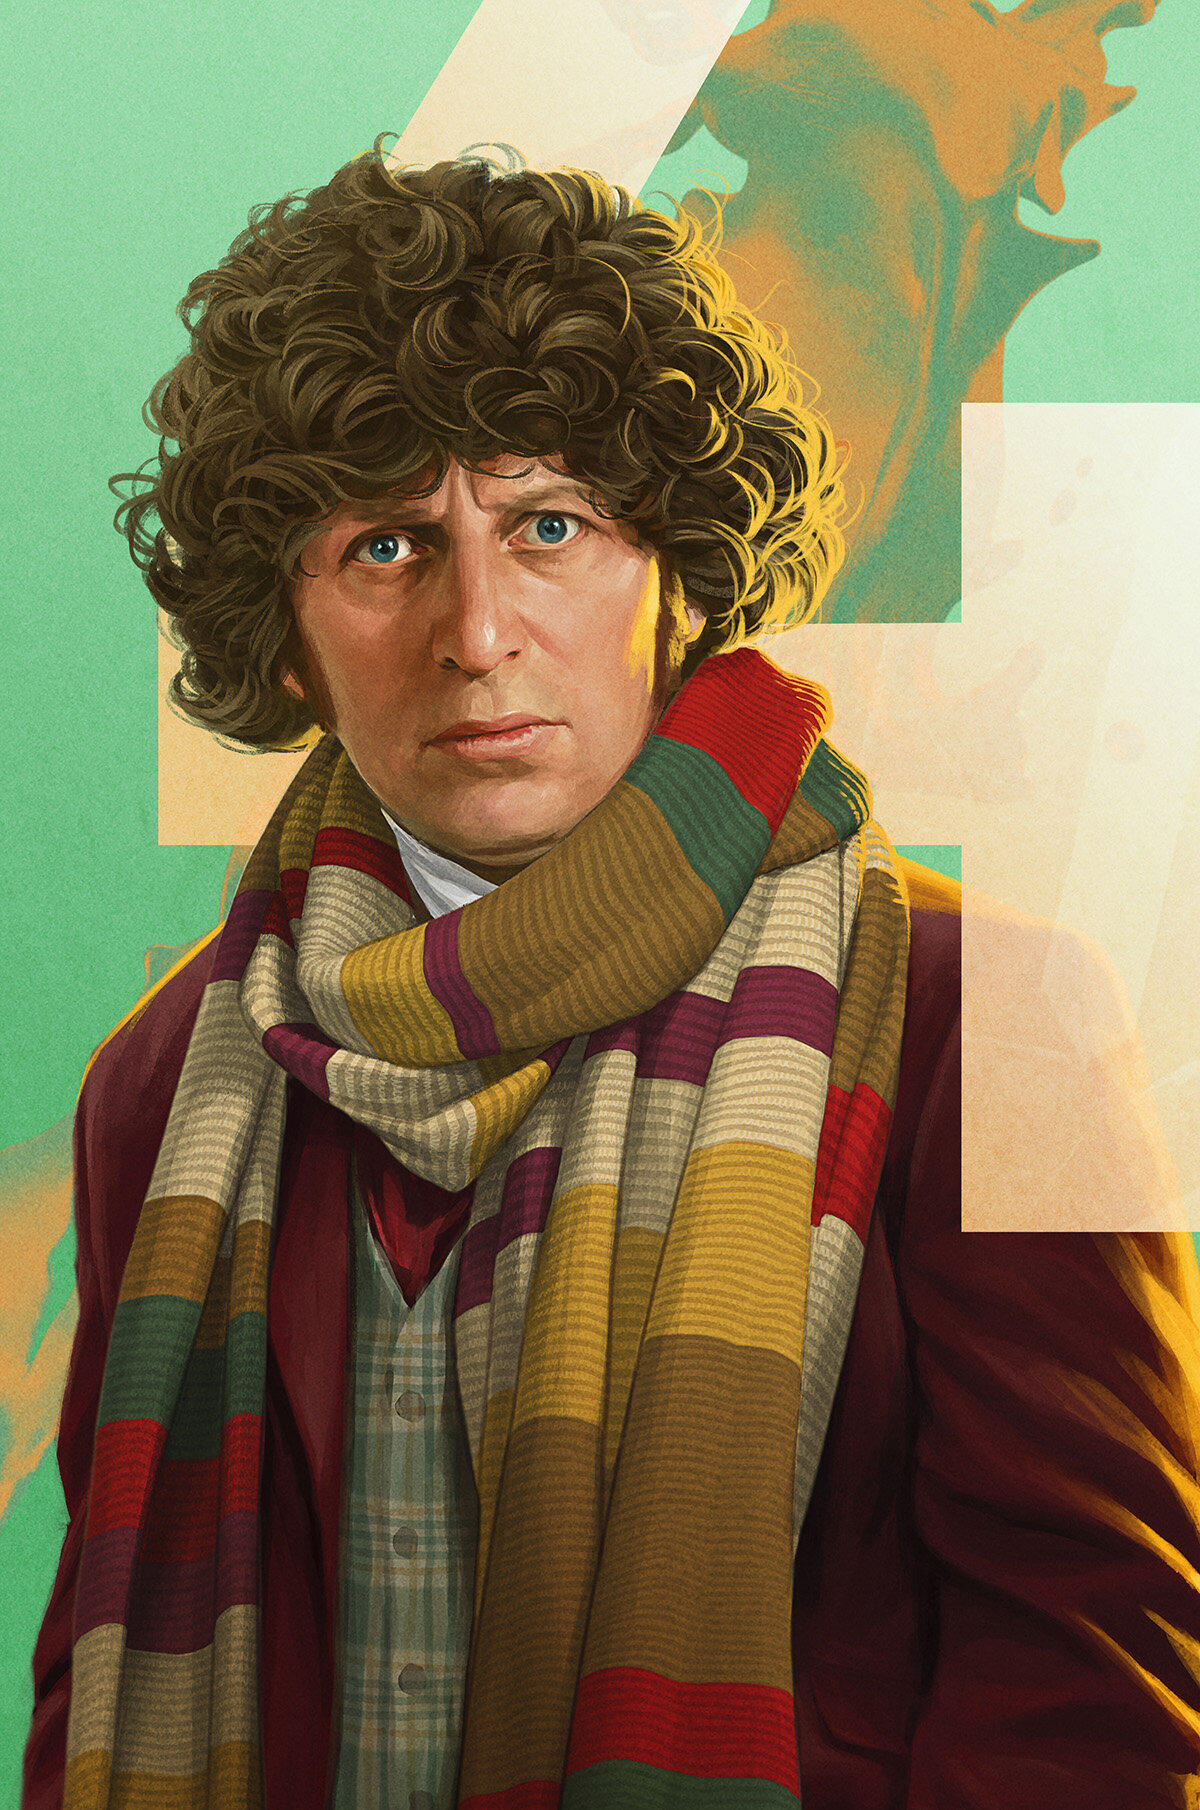 Dr_Who_TomBaker_RGB_FY_Test_03_1200px.jpg